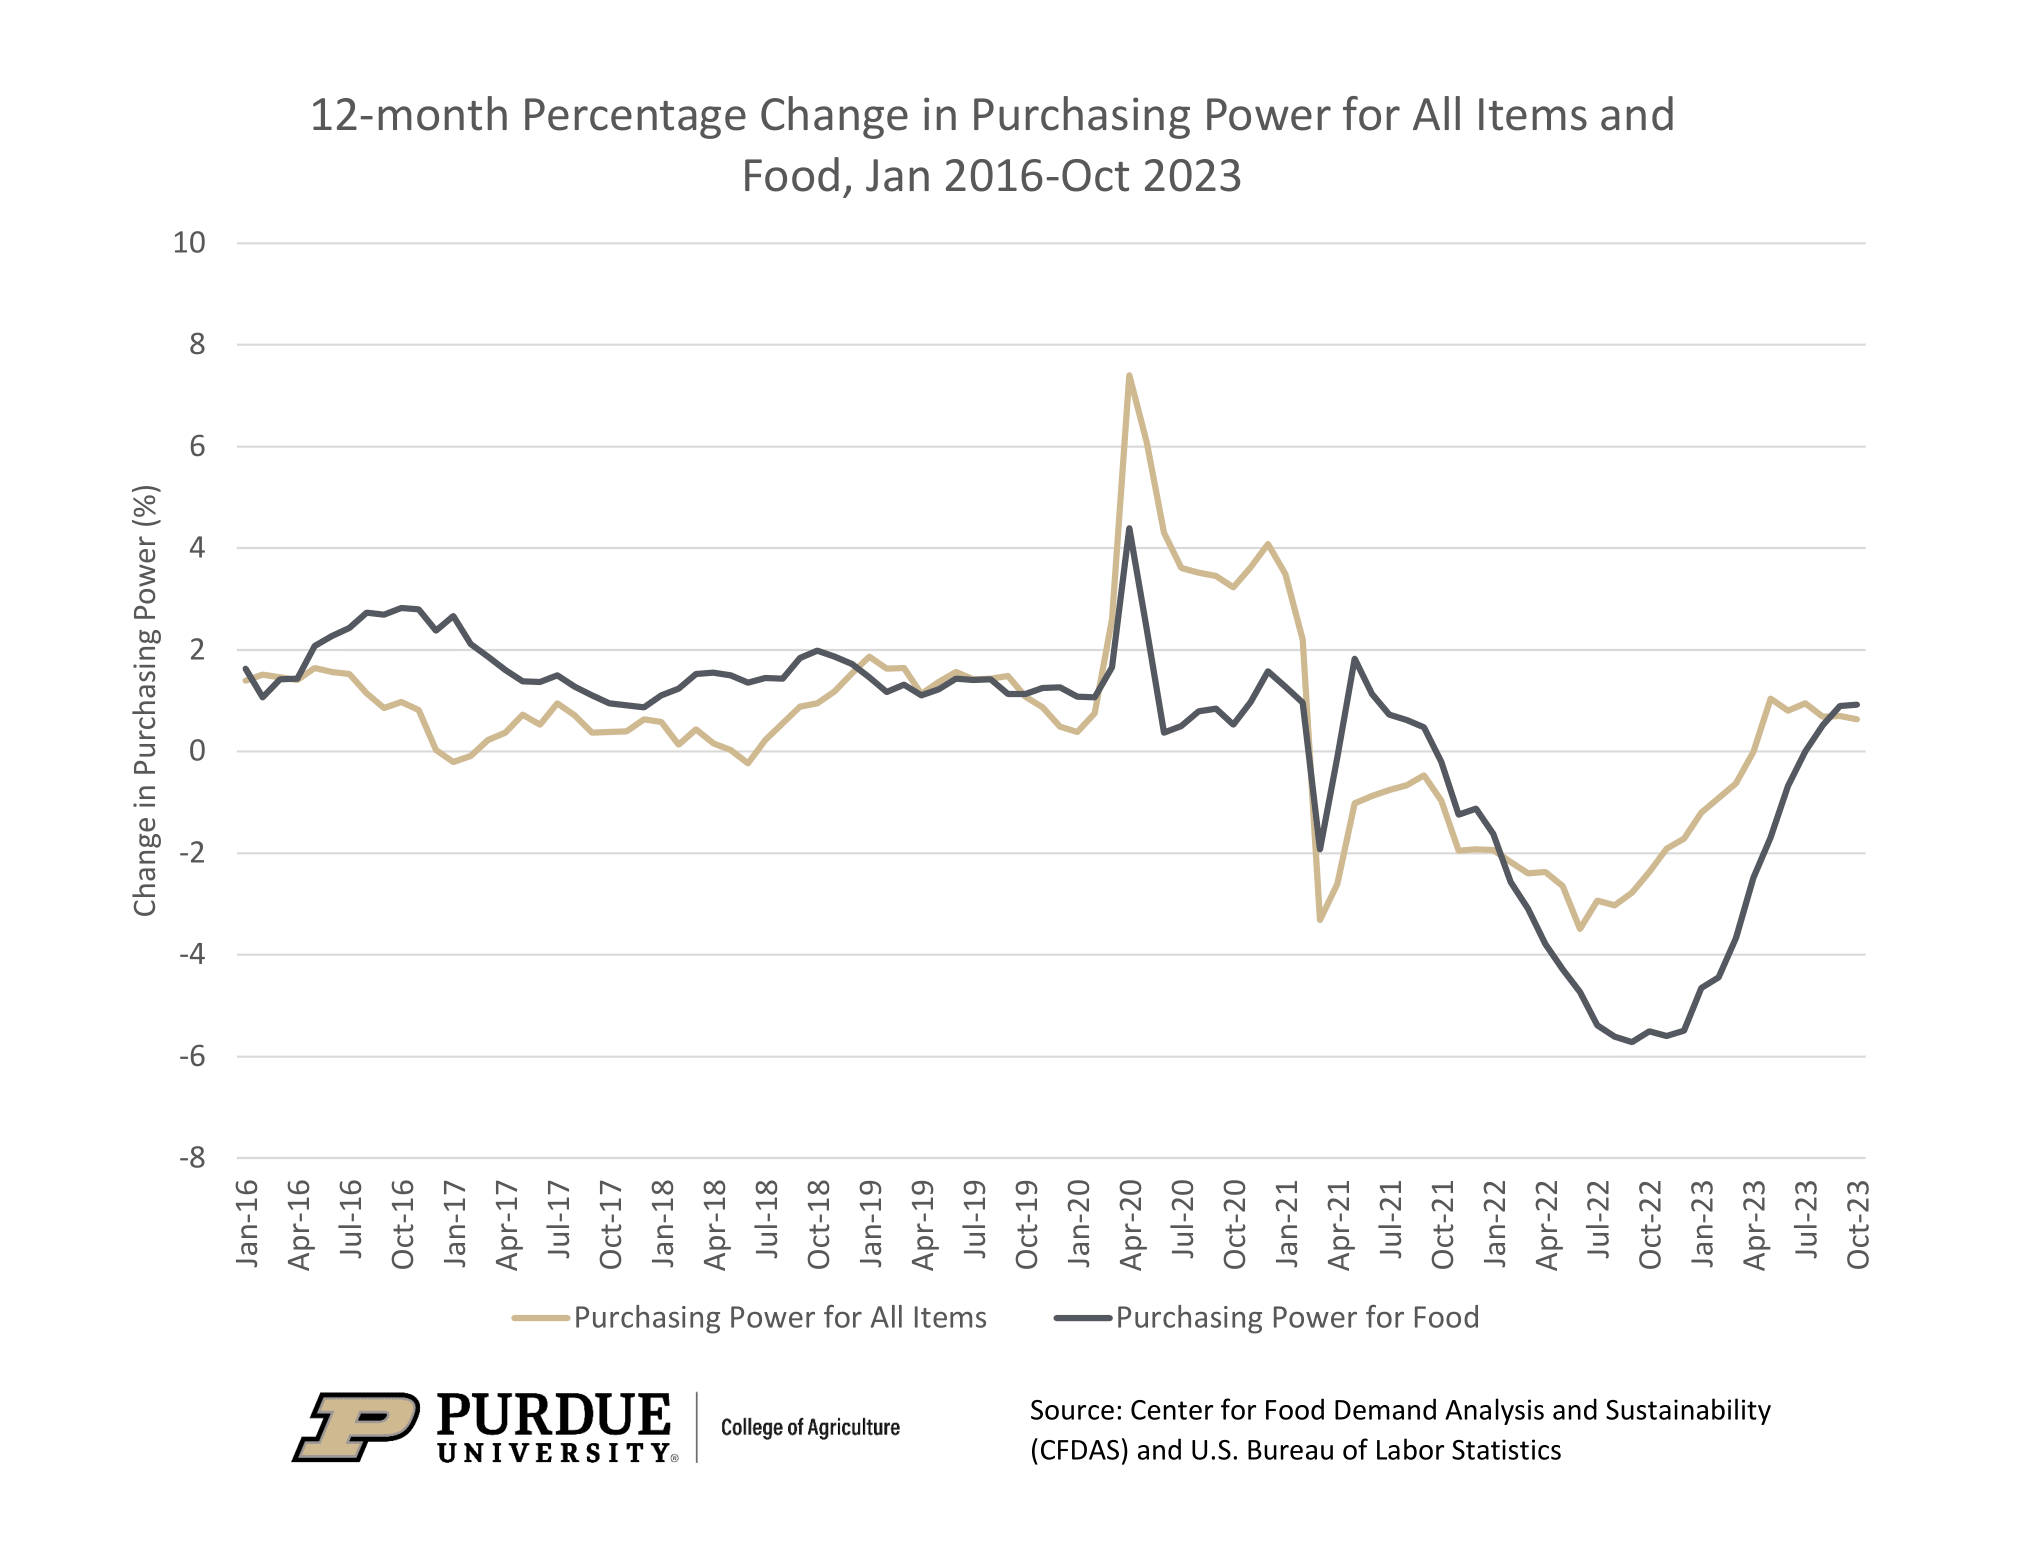 Figure 2. 12-month Percentage Change in Purchasing Power for All Items and Food, January 2016 to October 2023